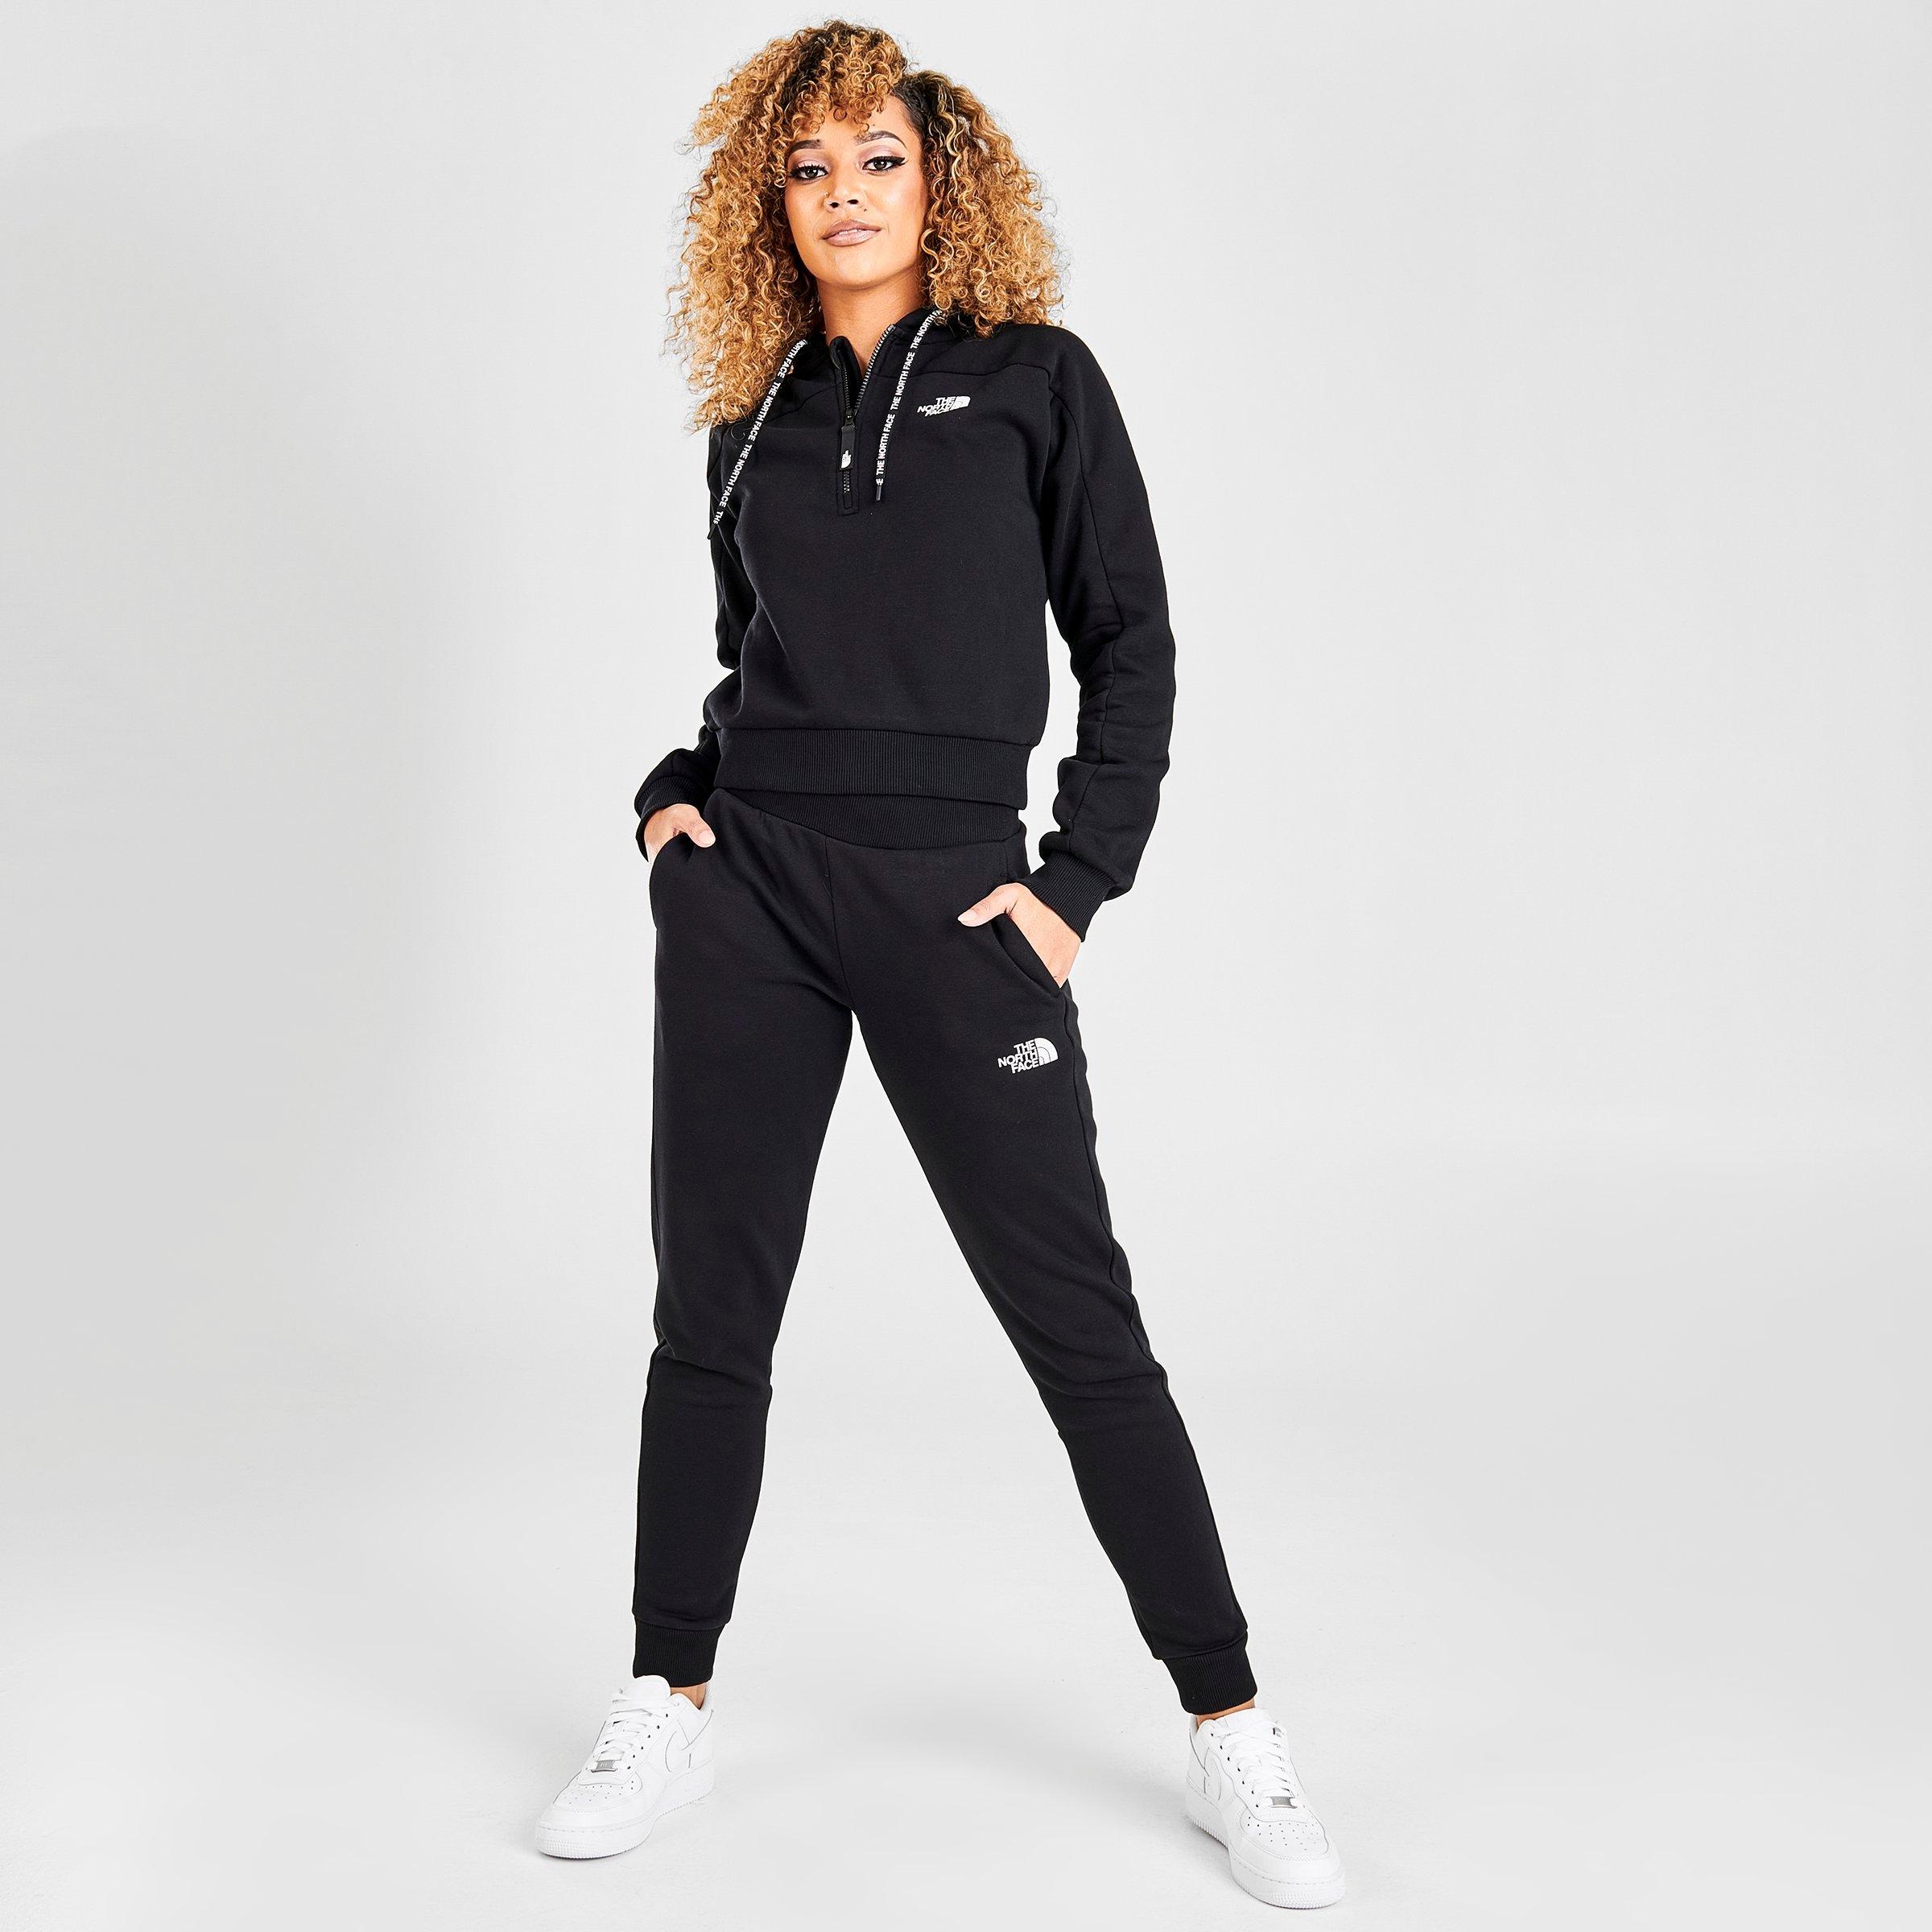 the north face joggers womens